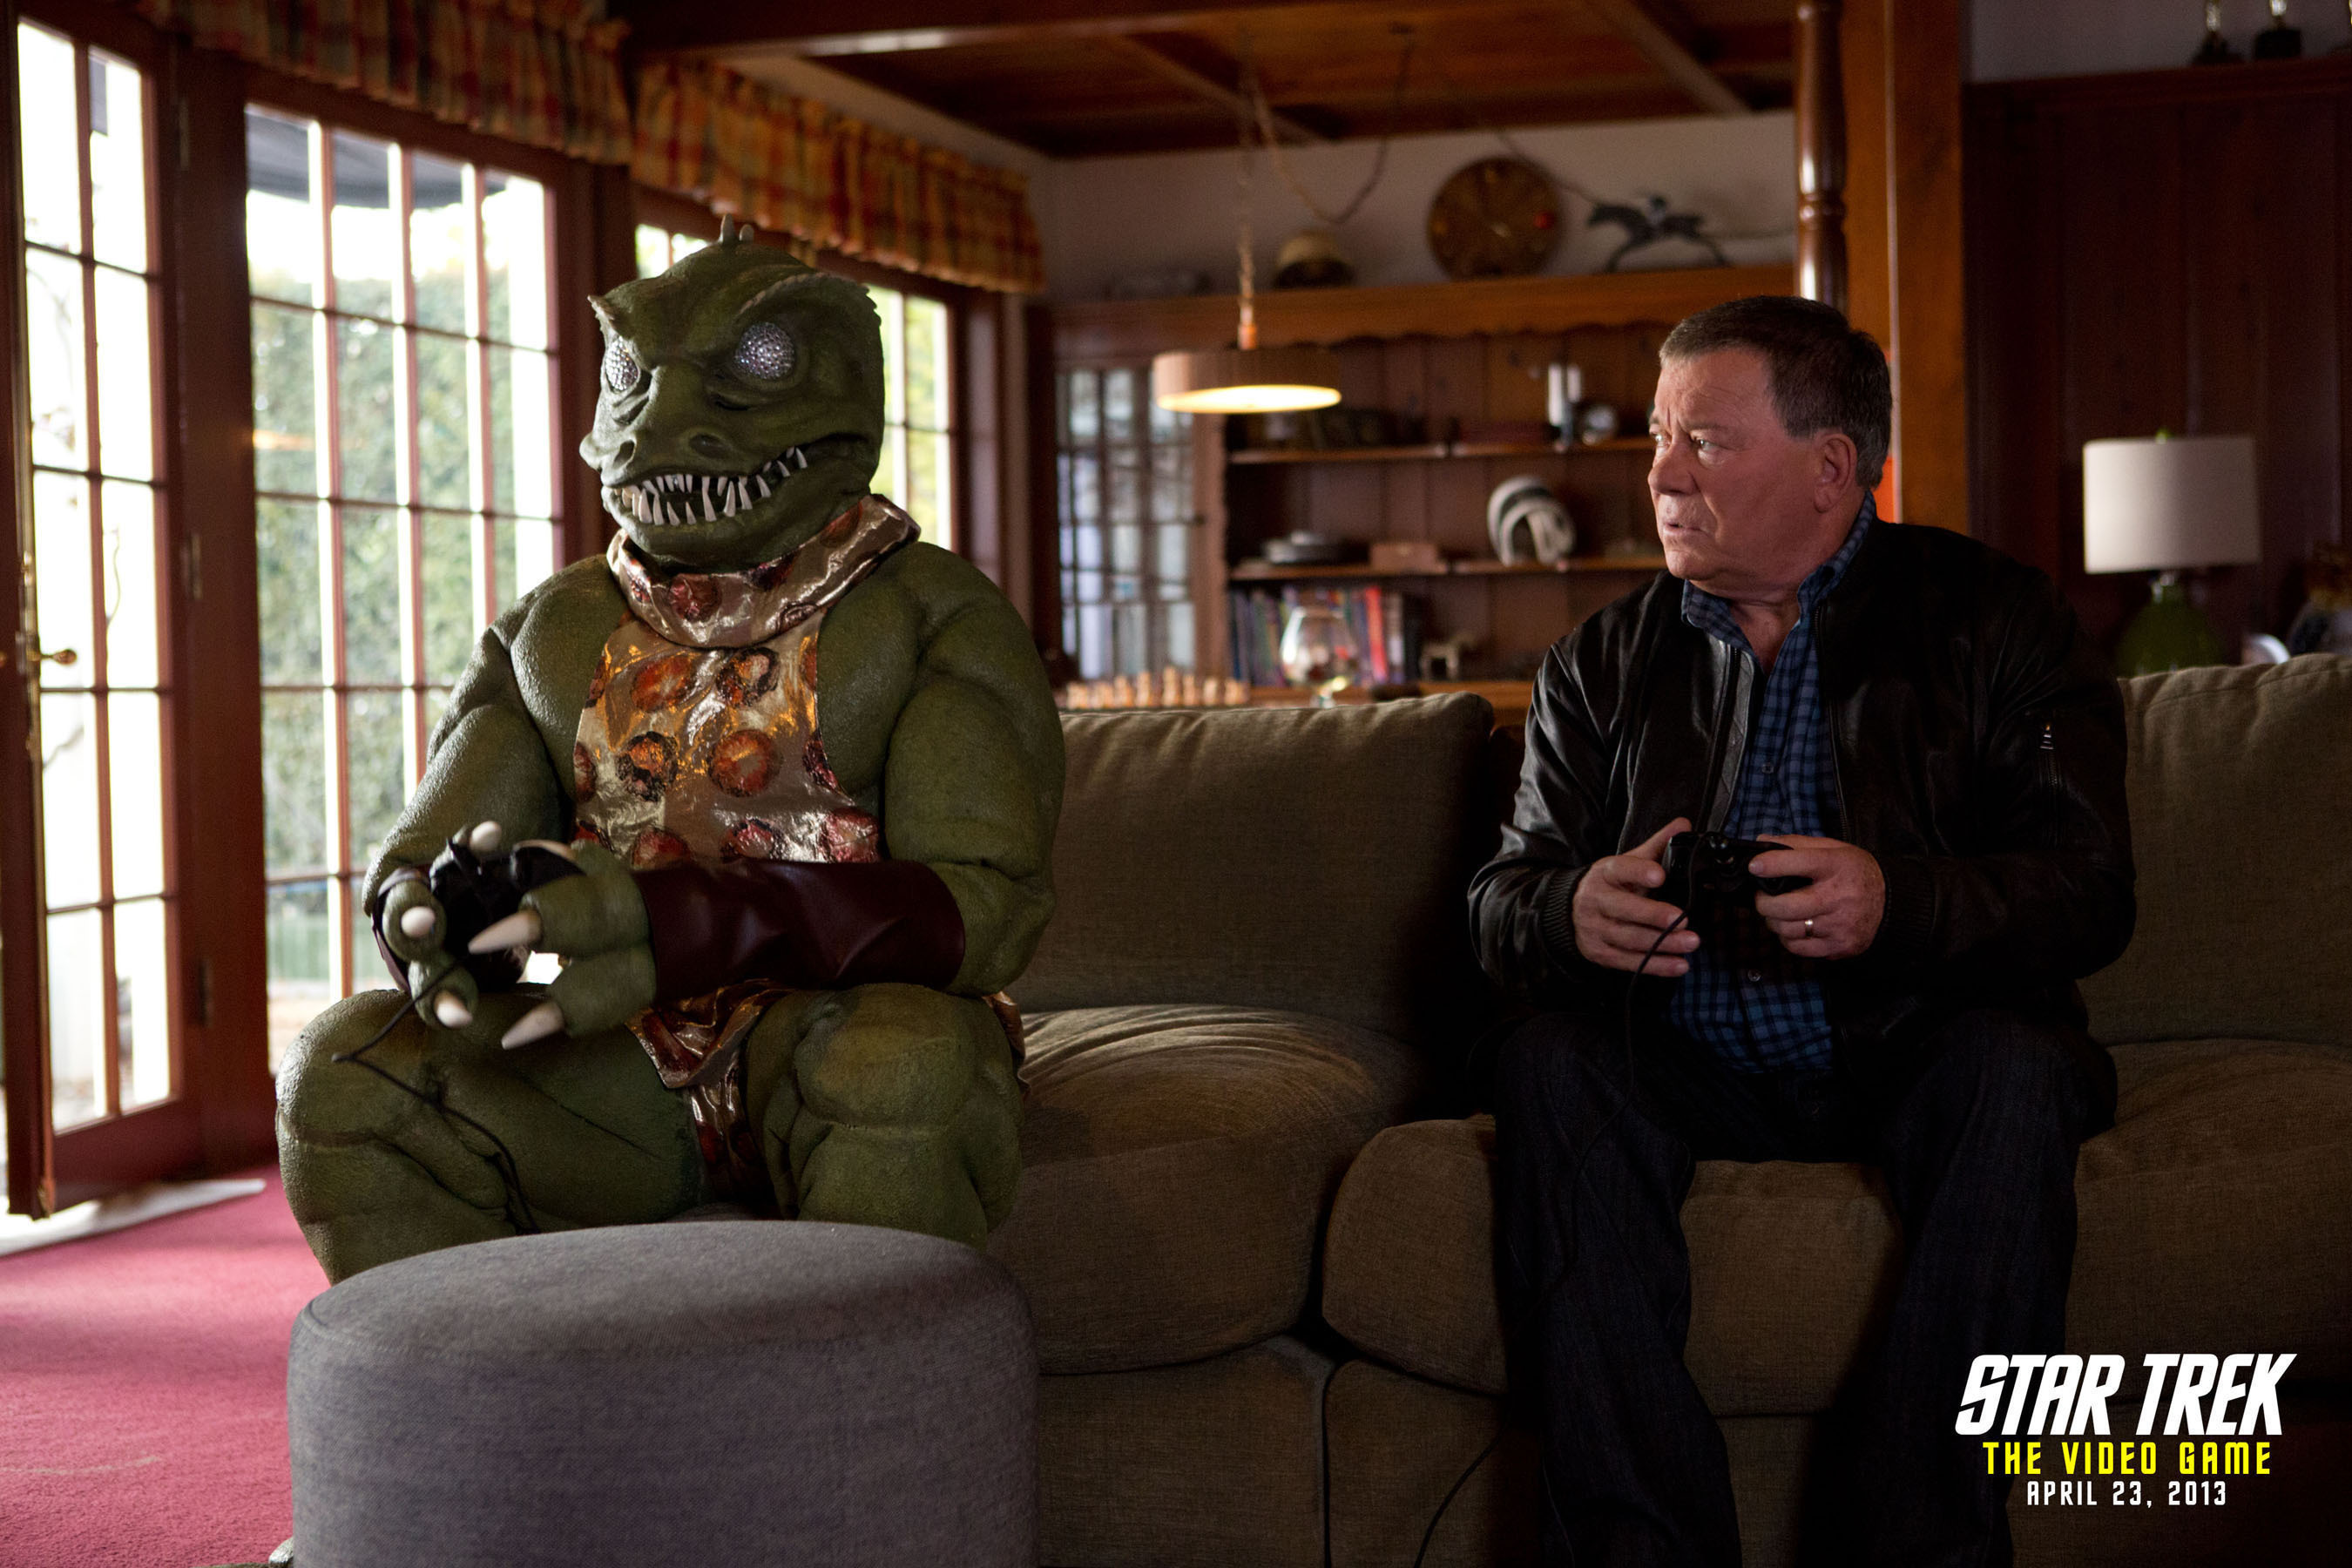 William Shatner and the Gorn reunite for the promotion of STAR TREK: THE VIDEO GAME (2013). (PRNewsFoto/Paramount Pictures Corporation) (PRNewsFoto/PARAMOUNT PICTURES CORPORATION)